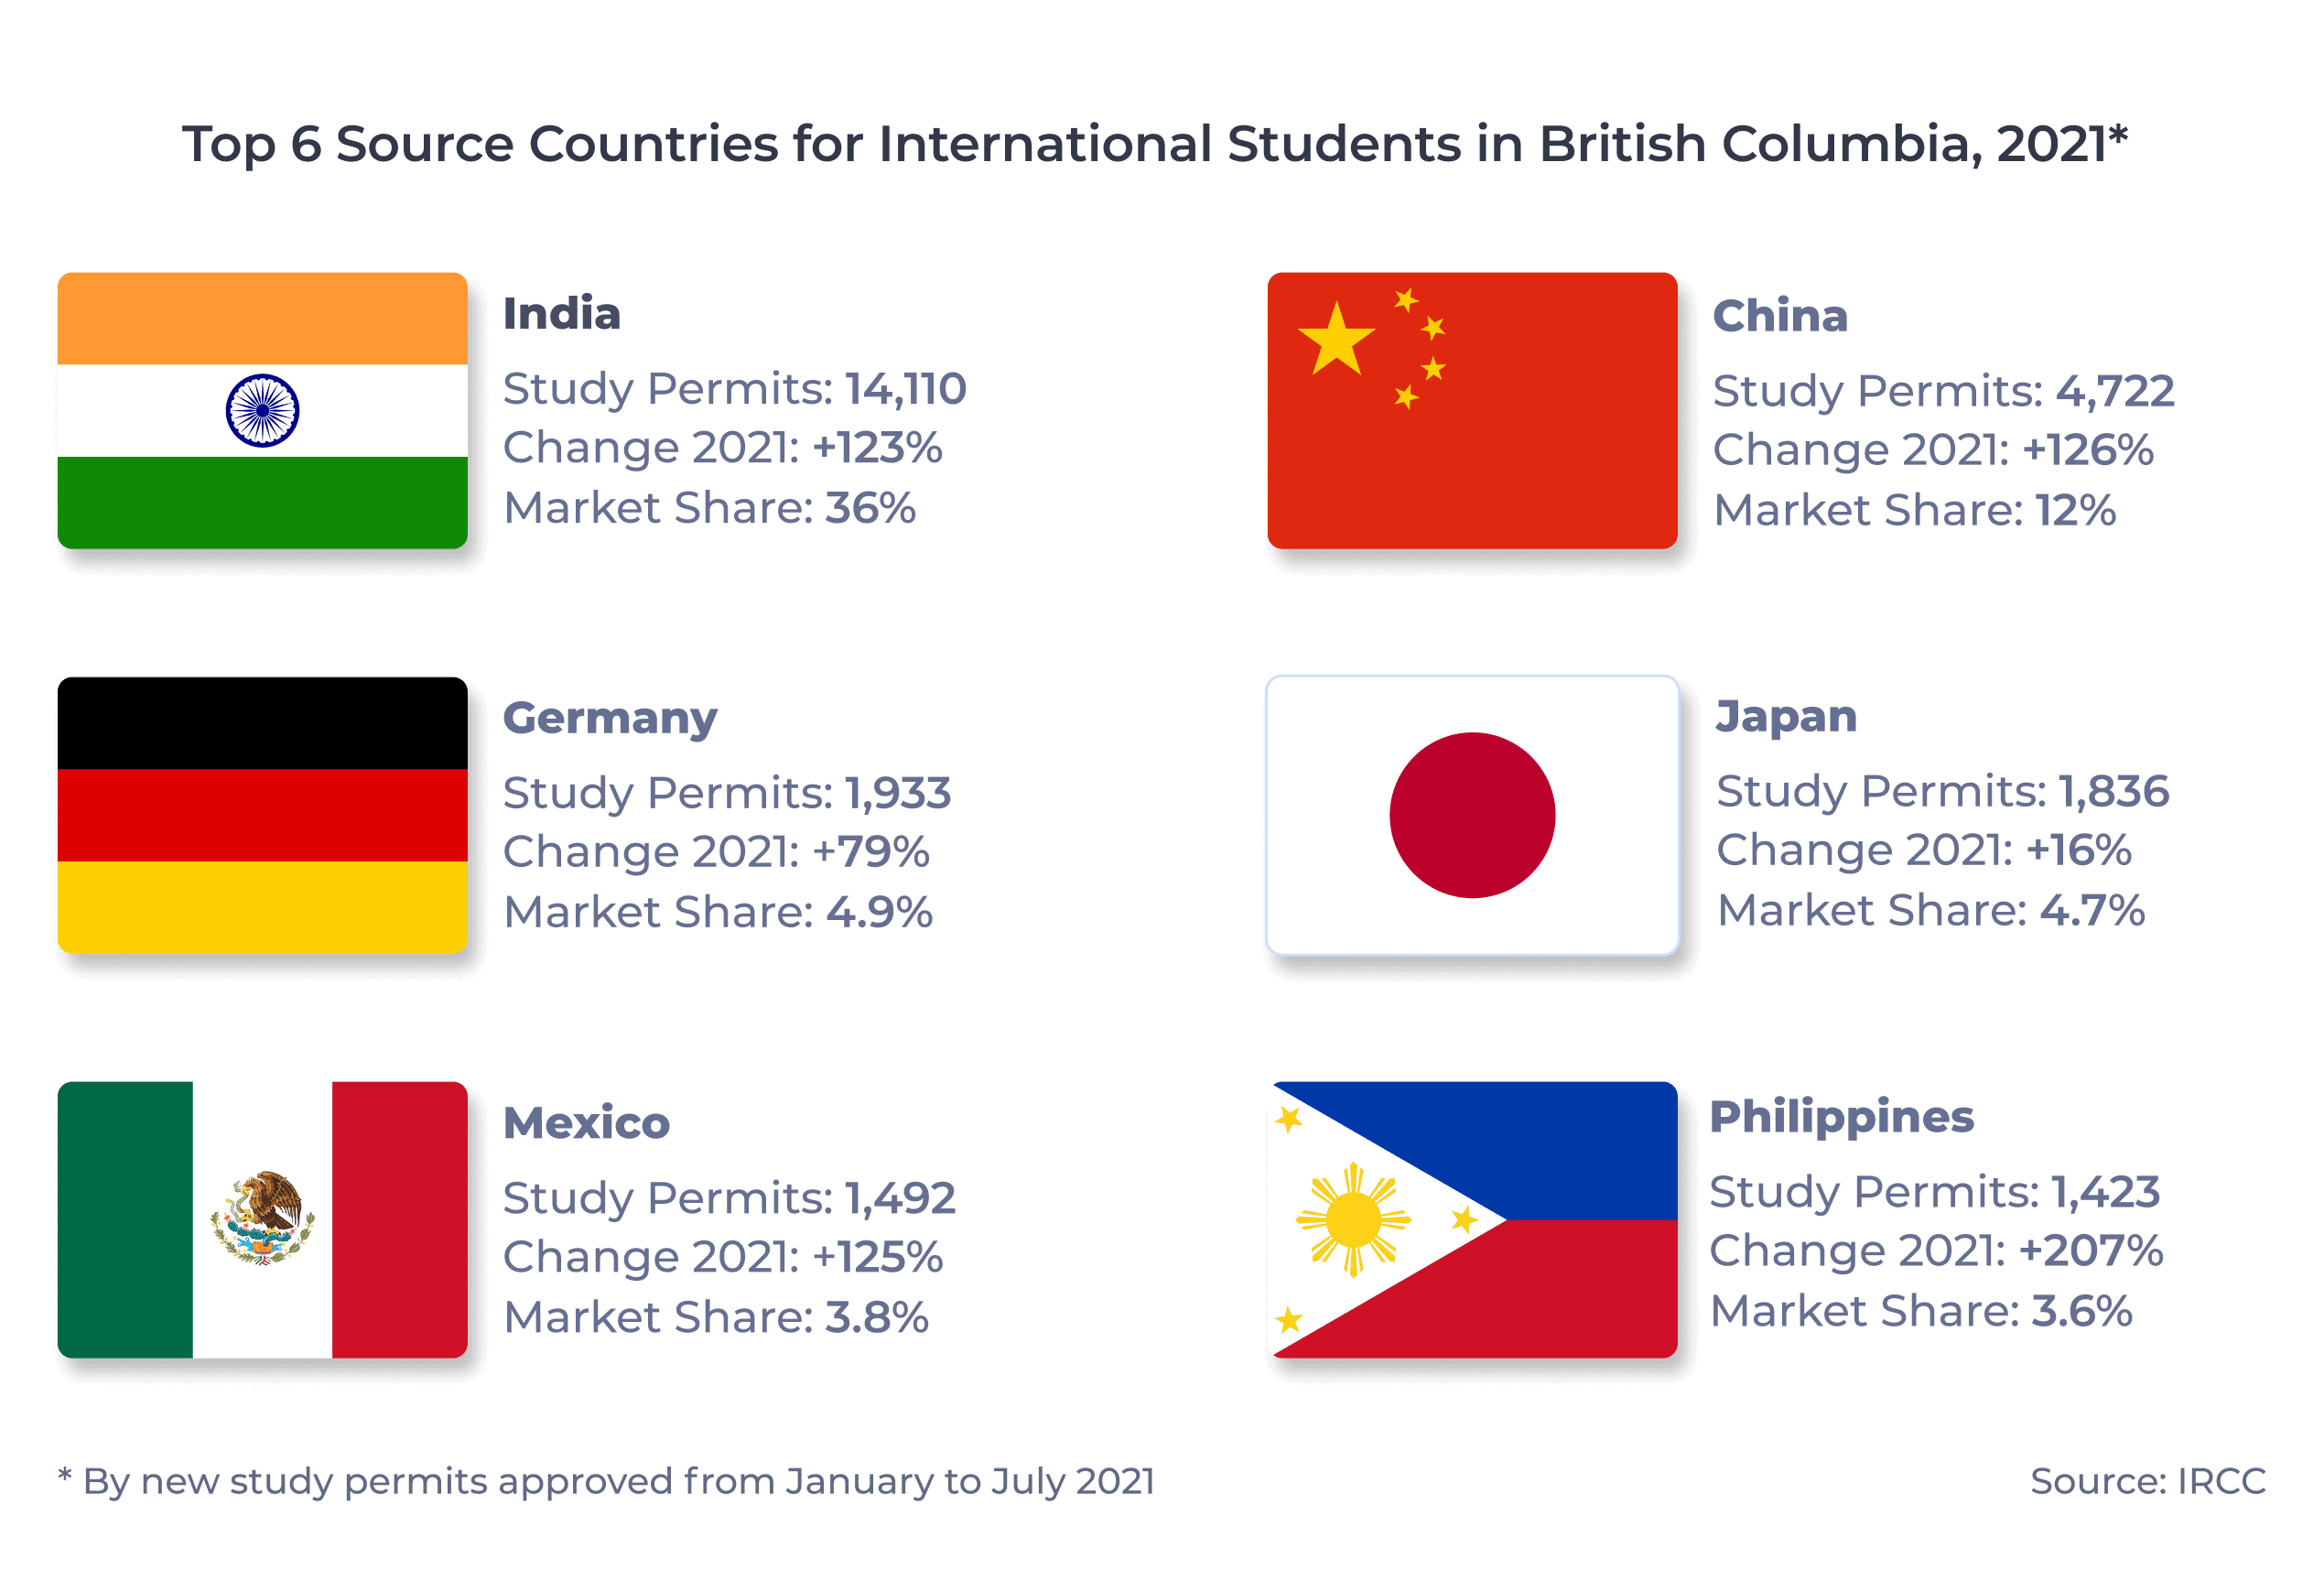 Top 6 Source Countries for International Students in Quebec, 2021